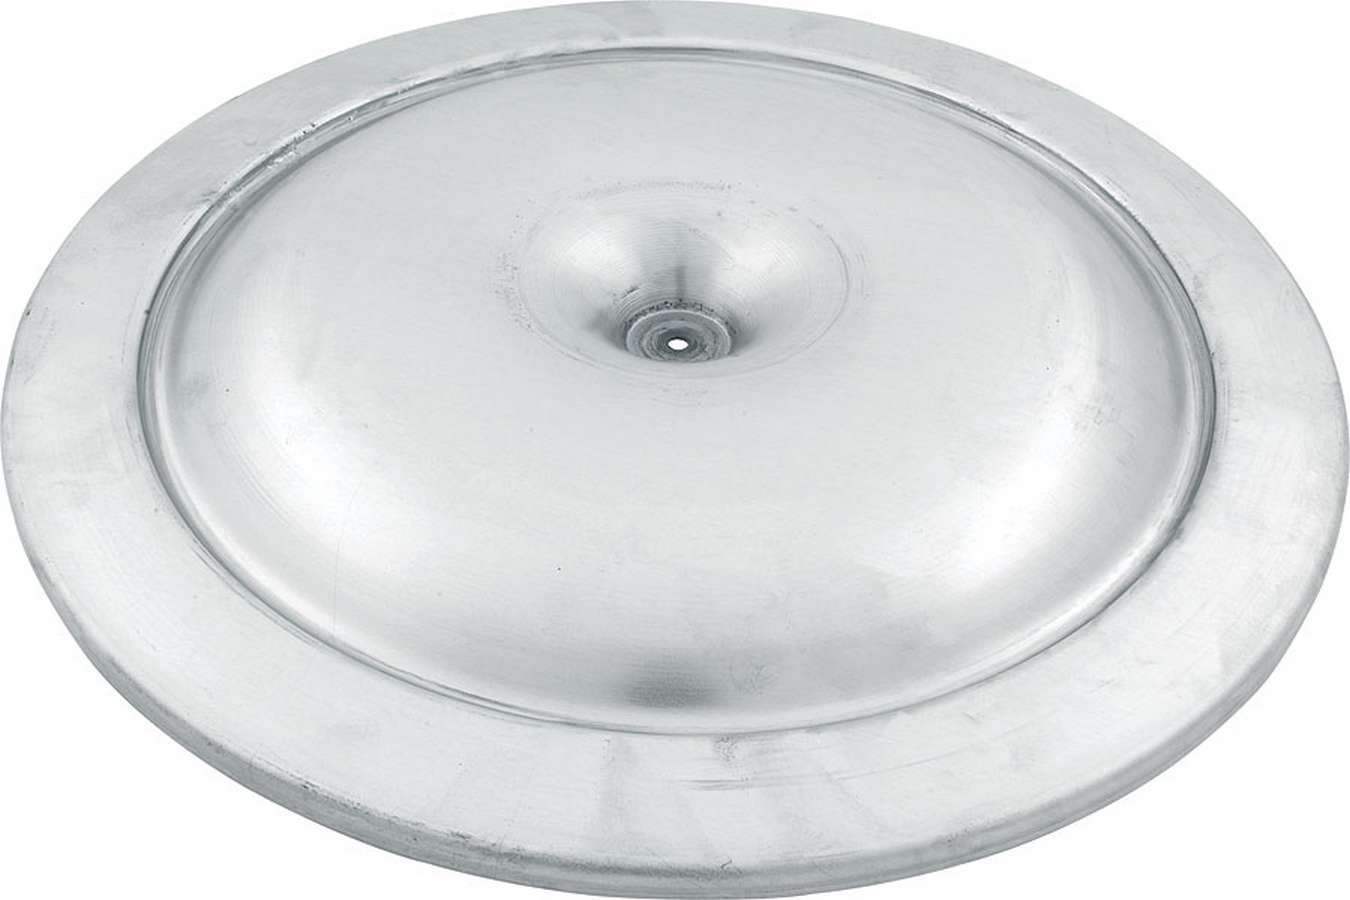 Allstar Performance 26090 Air Cleaner Lid, 14 in Round, Aluminum, Natural, Each